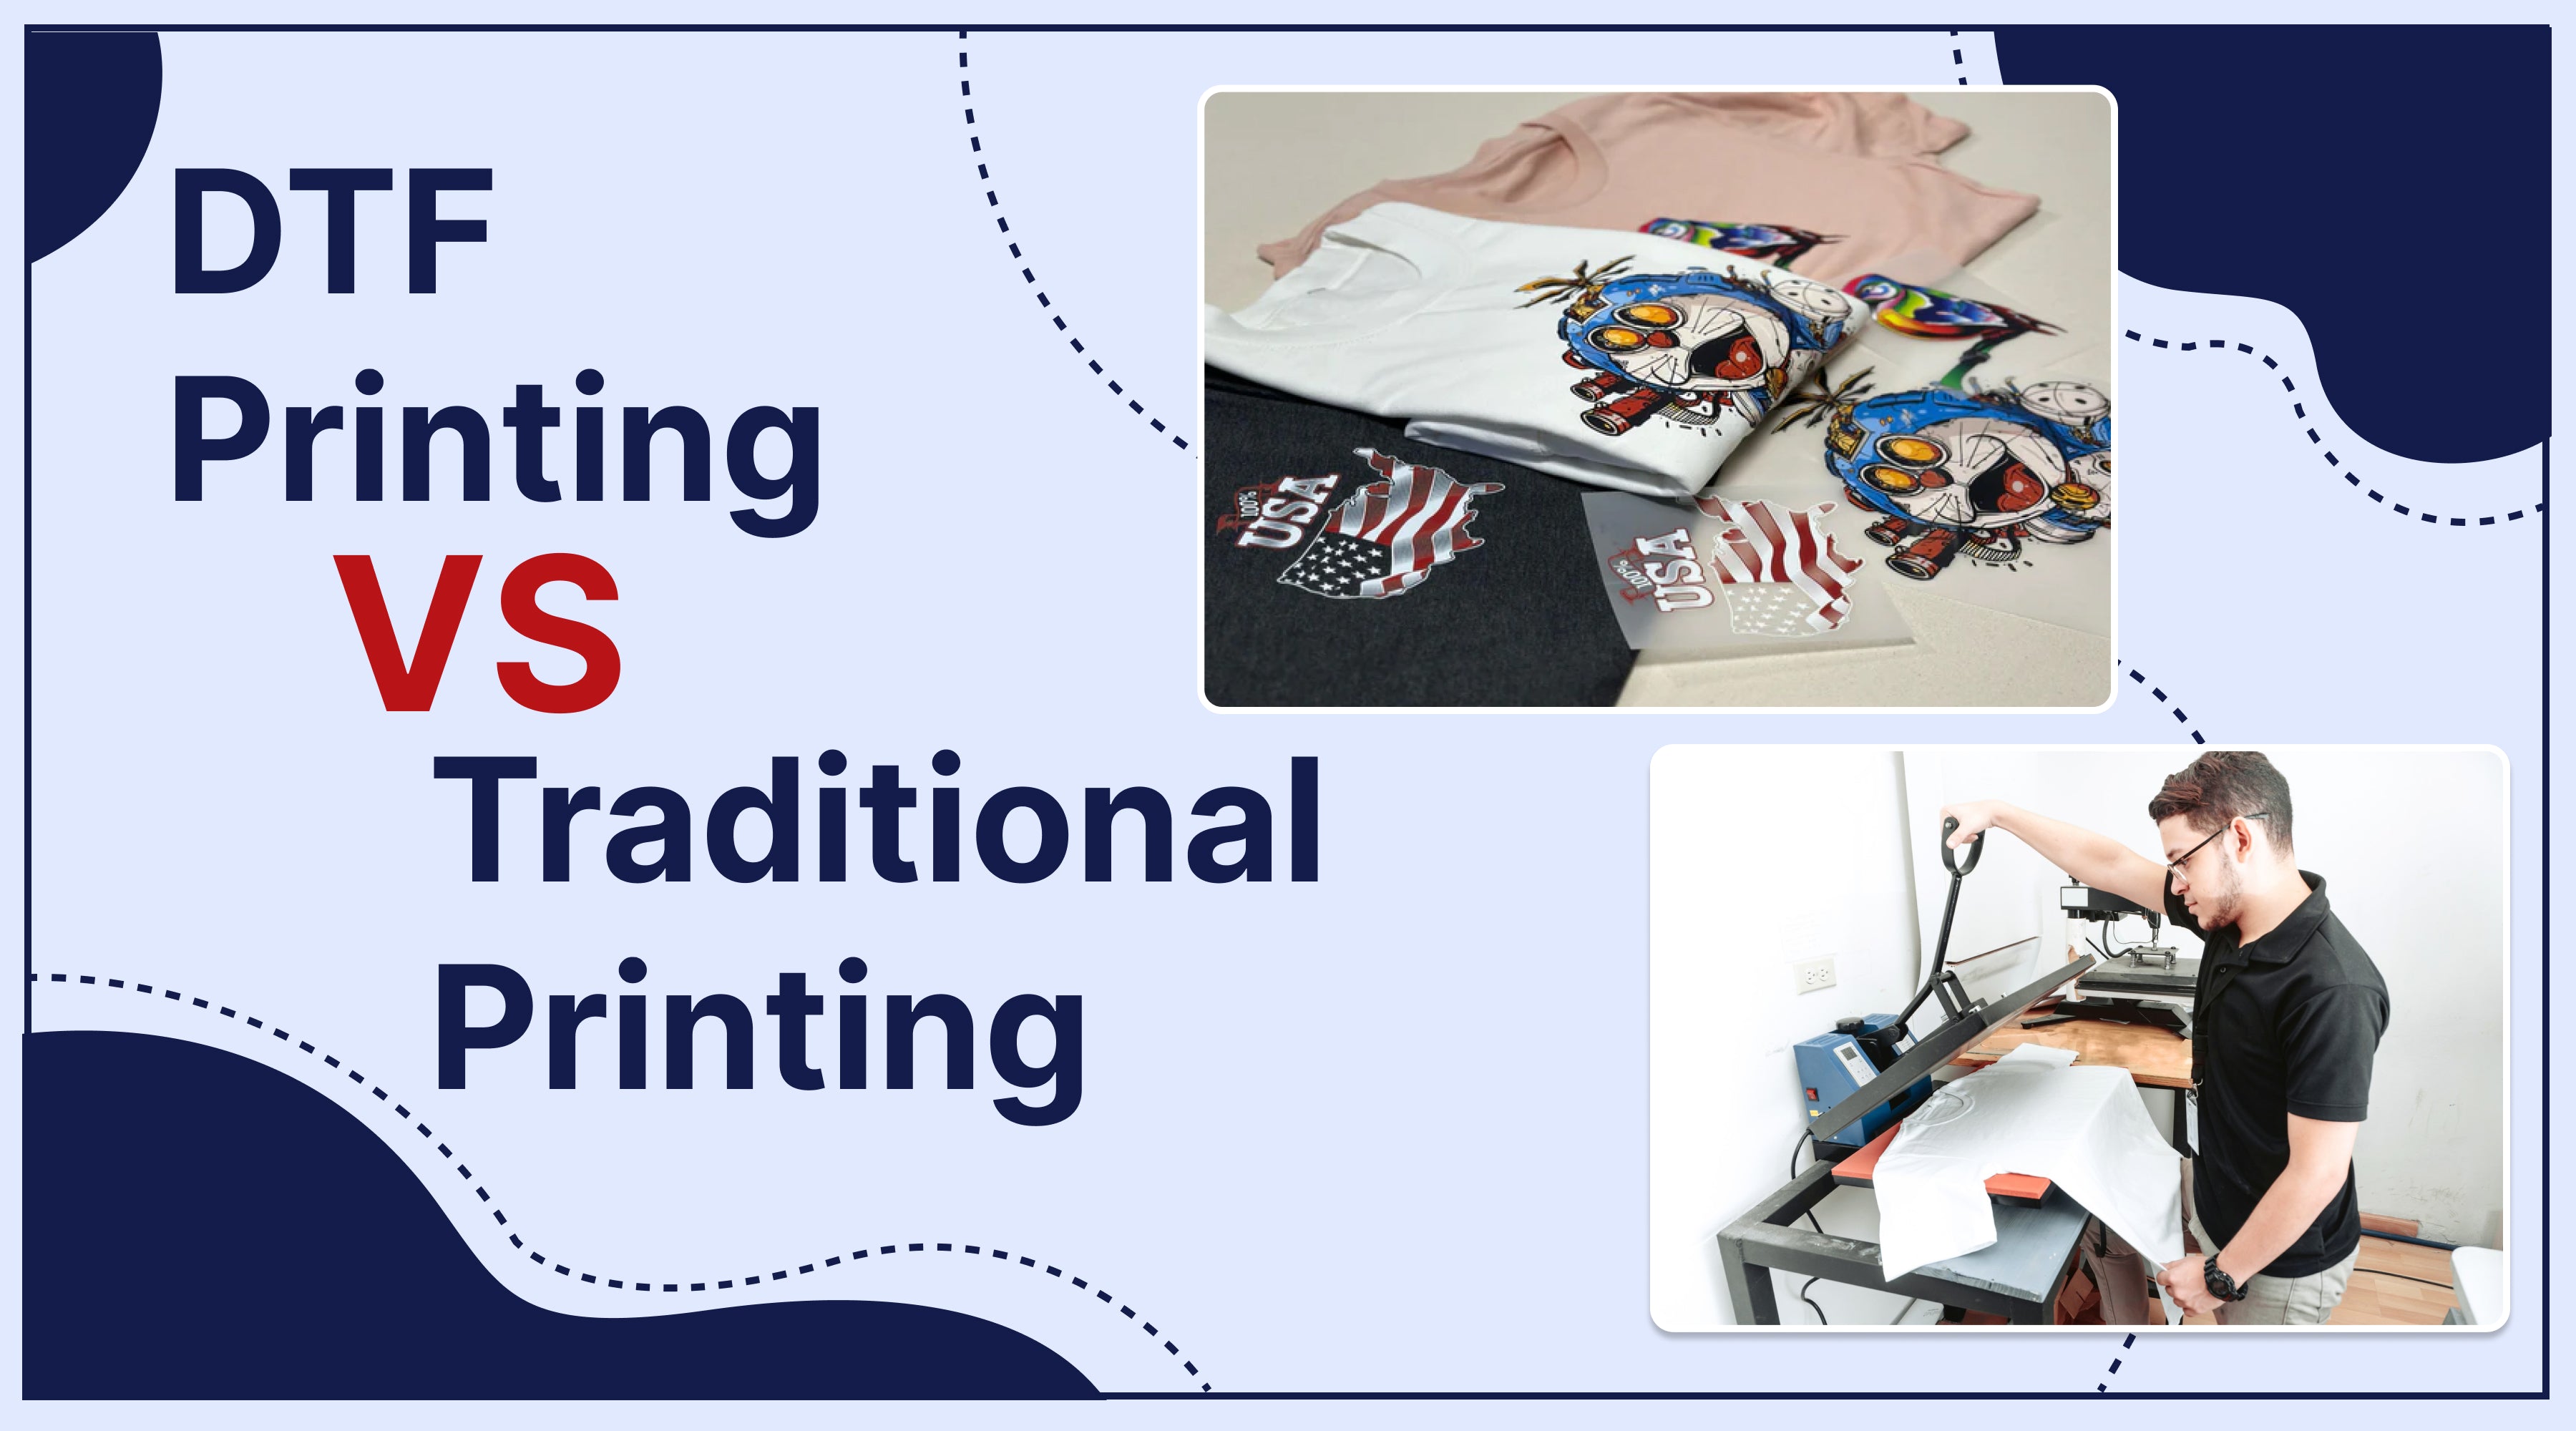 Comparing DTF Printing to Traditional Printing Methods - DTF NC